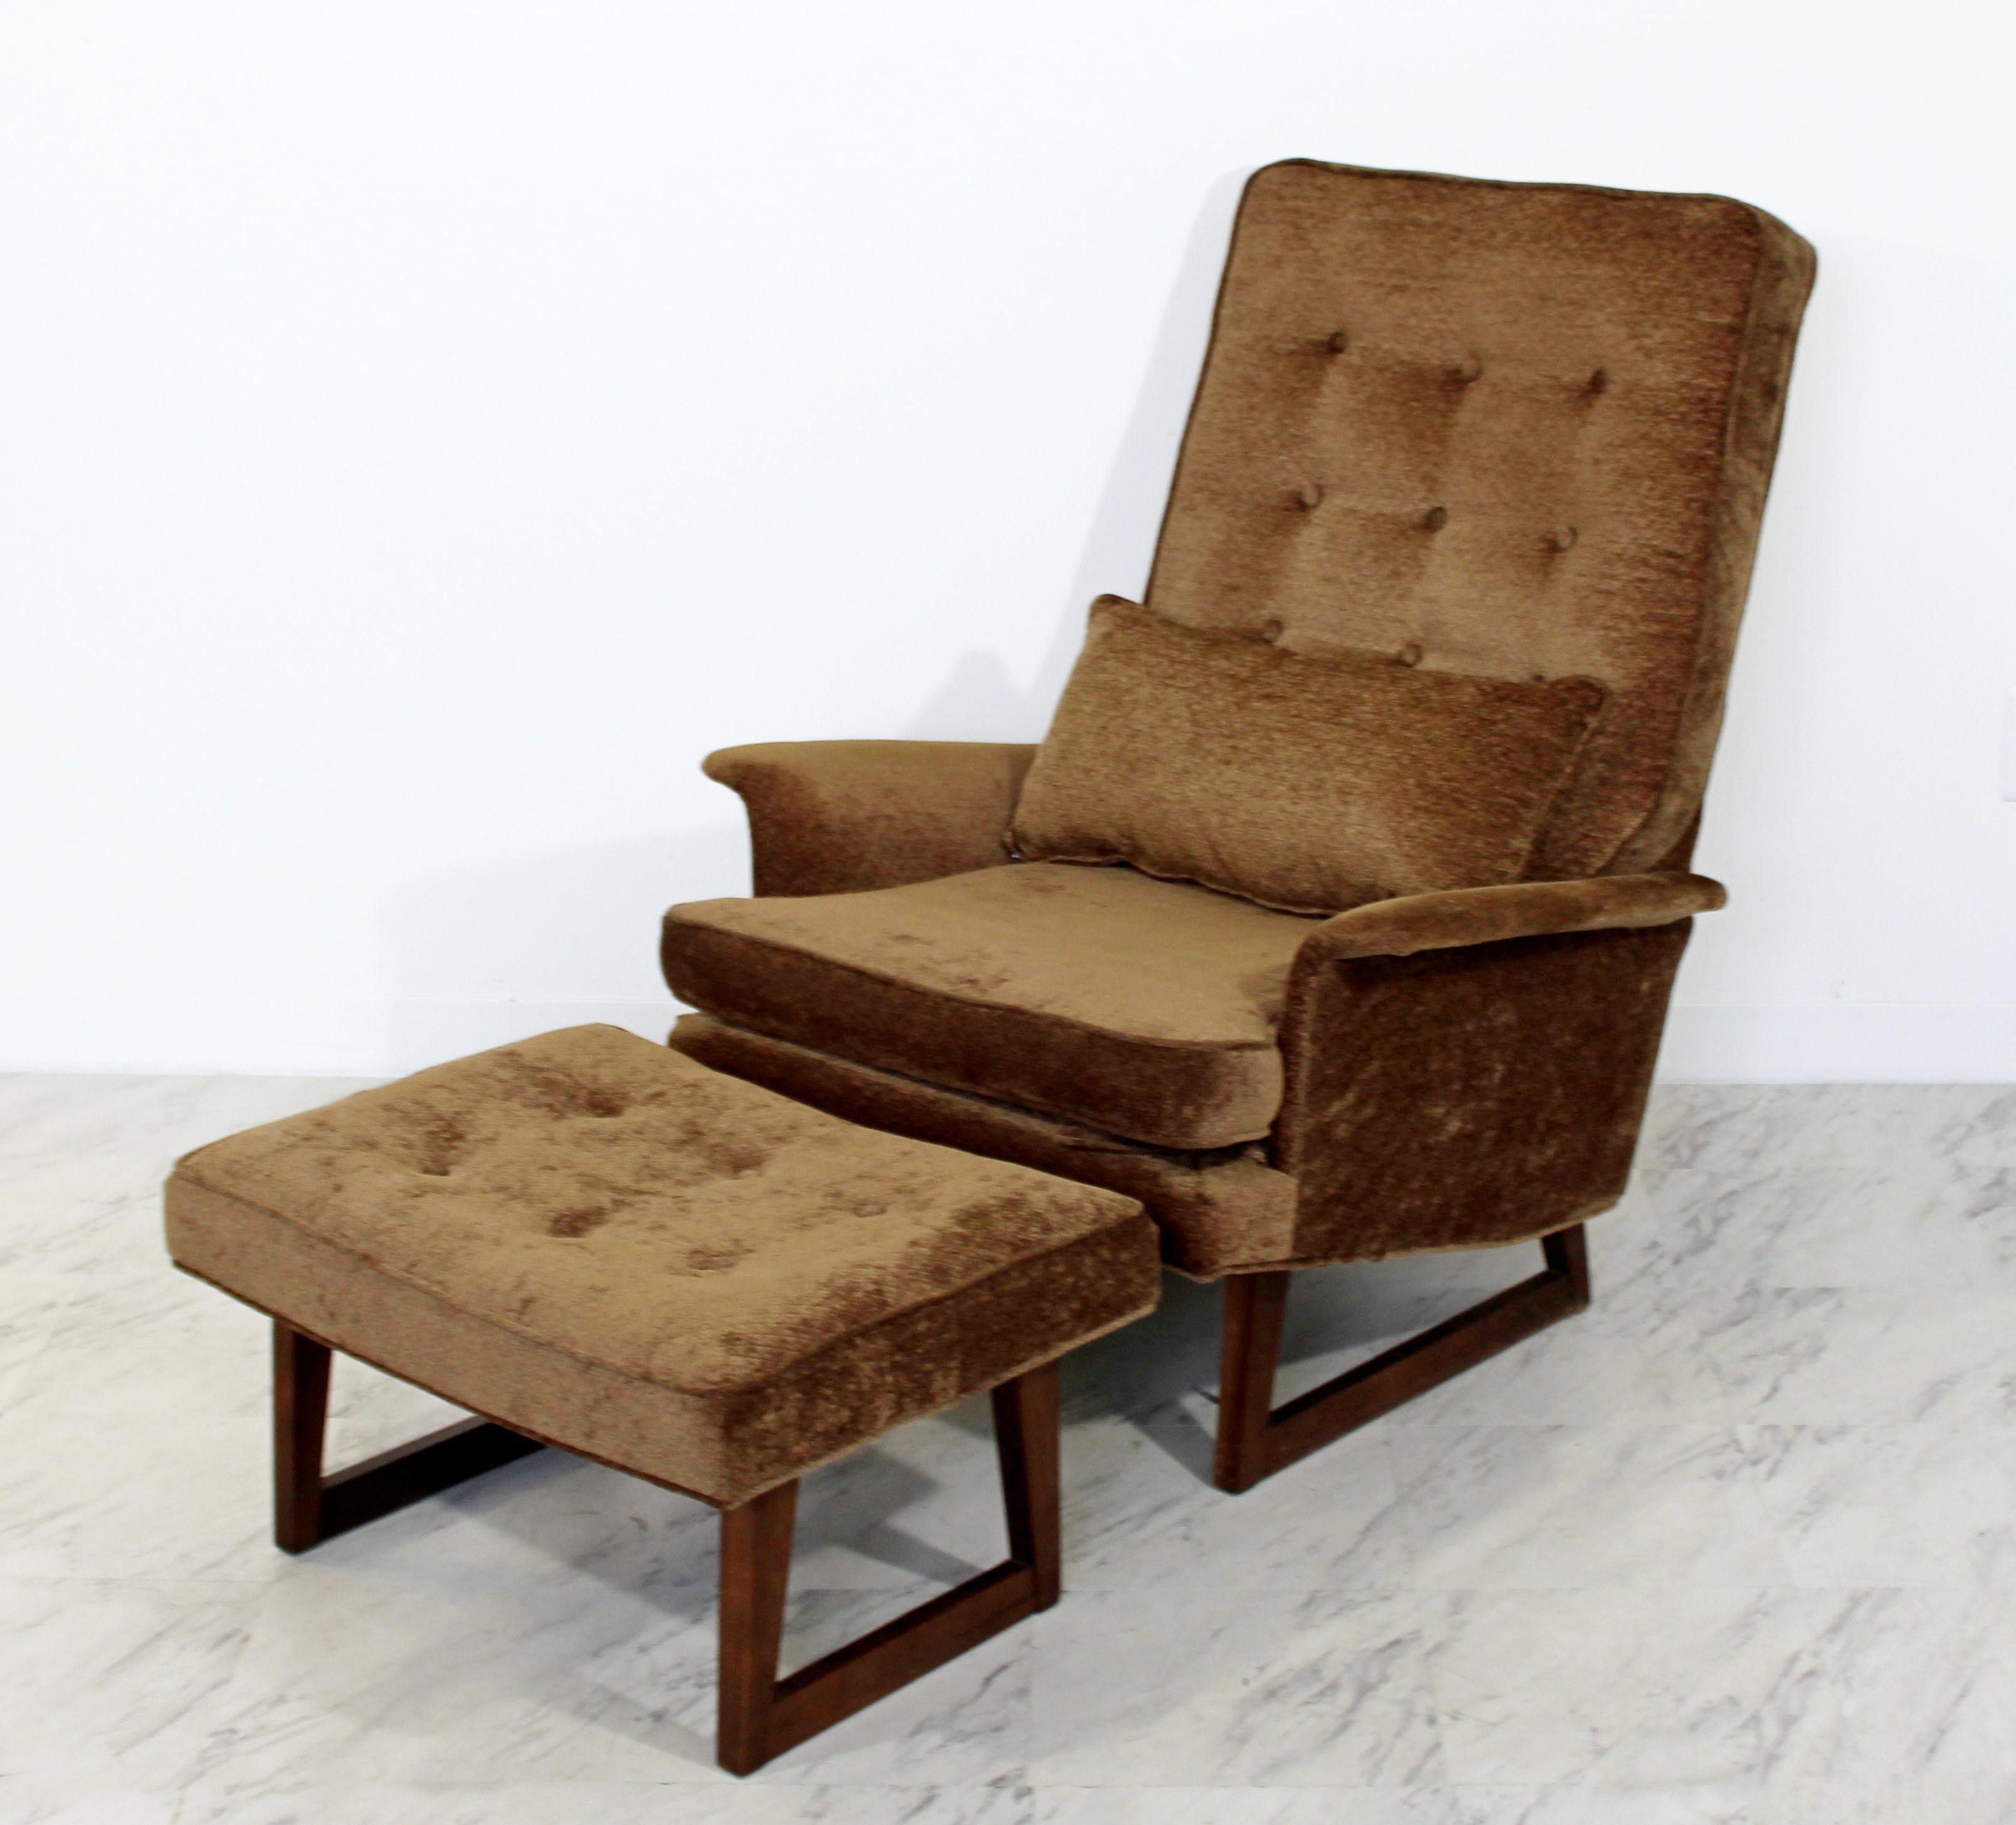 For your consideration are a gorgeous lounge armchair and matching ottoman, by Danish company DUX, circa the 1960s. In very good condition. The dimensions of the chair are 32